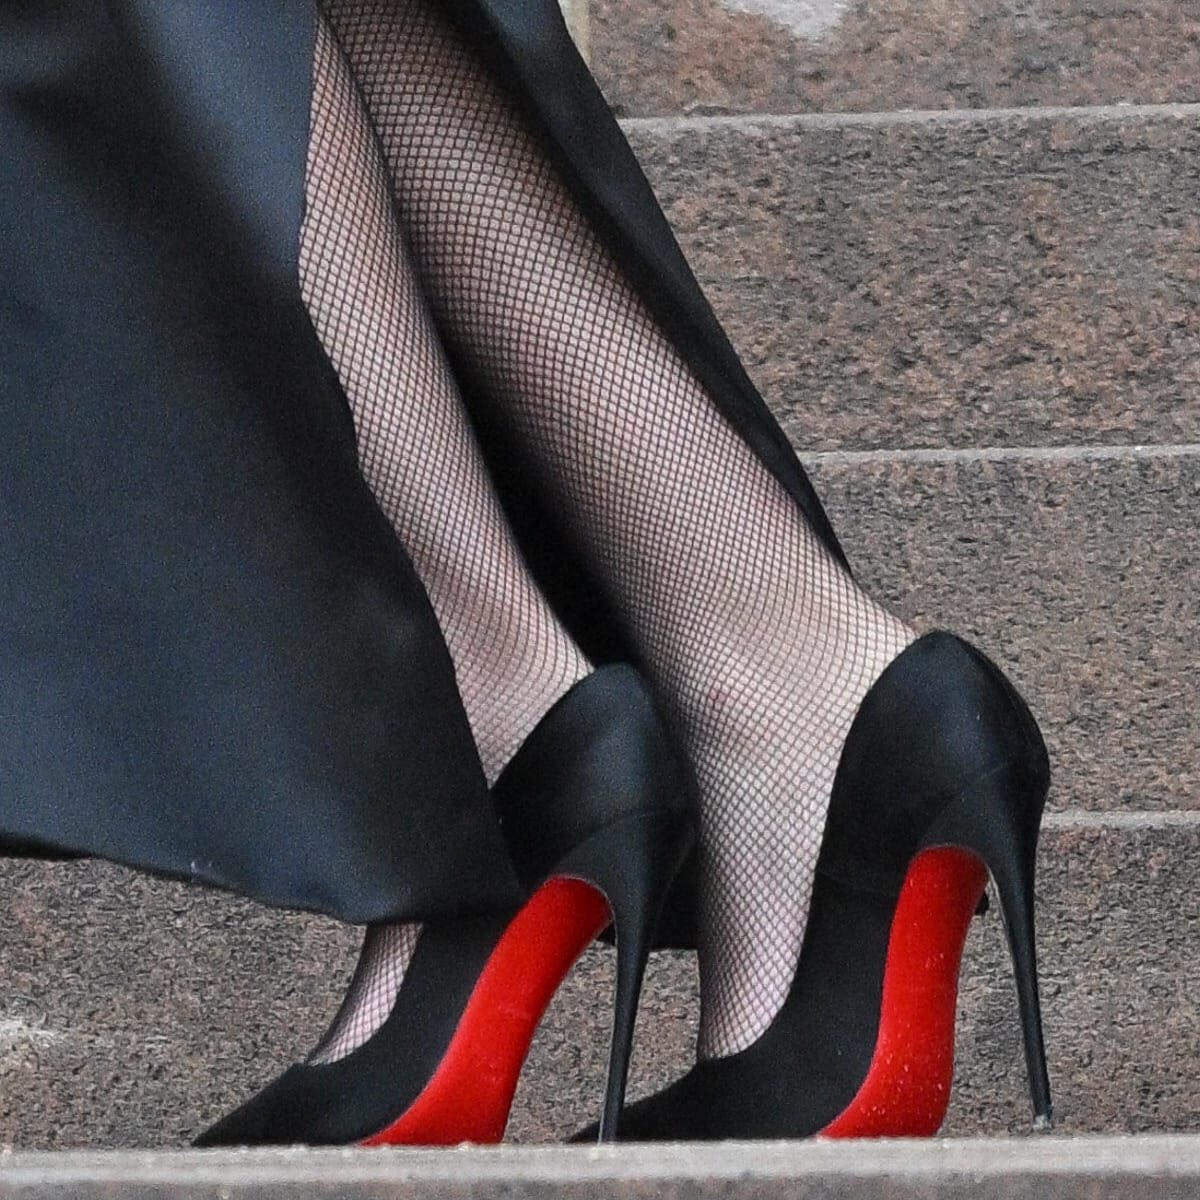 A zoomed-in shot of Zendaya's feet, accentuating the iconic red soles of her Christian Louboutin stiletto pumps